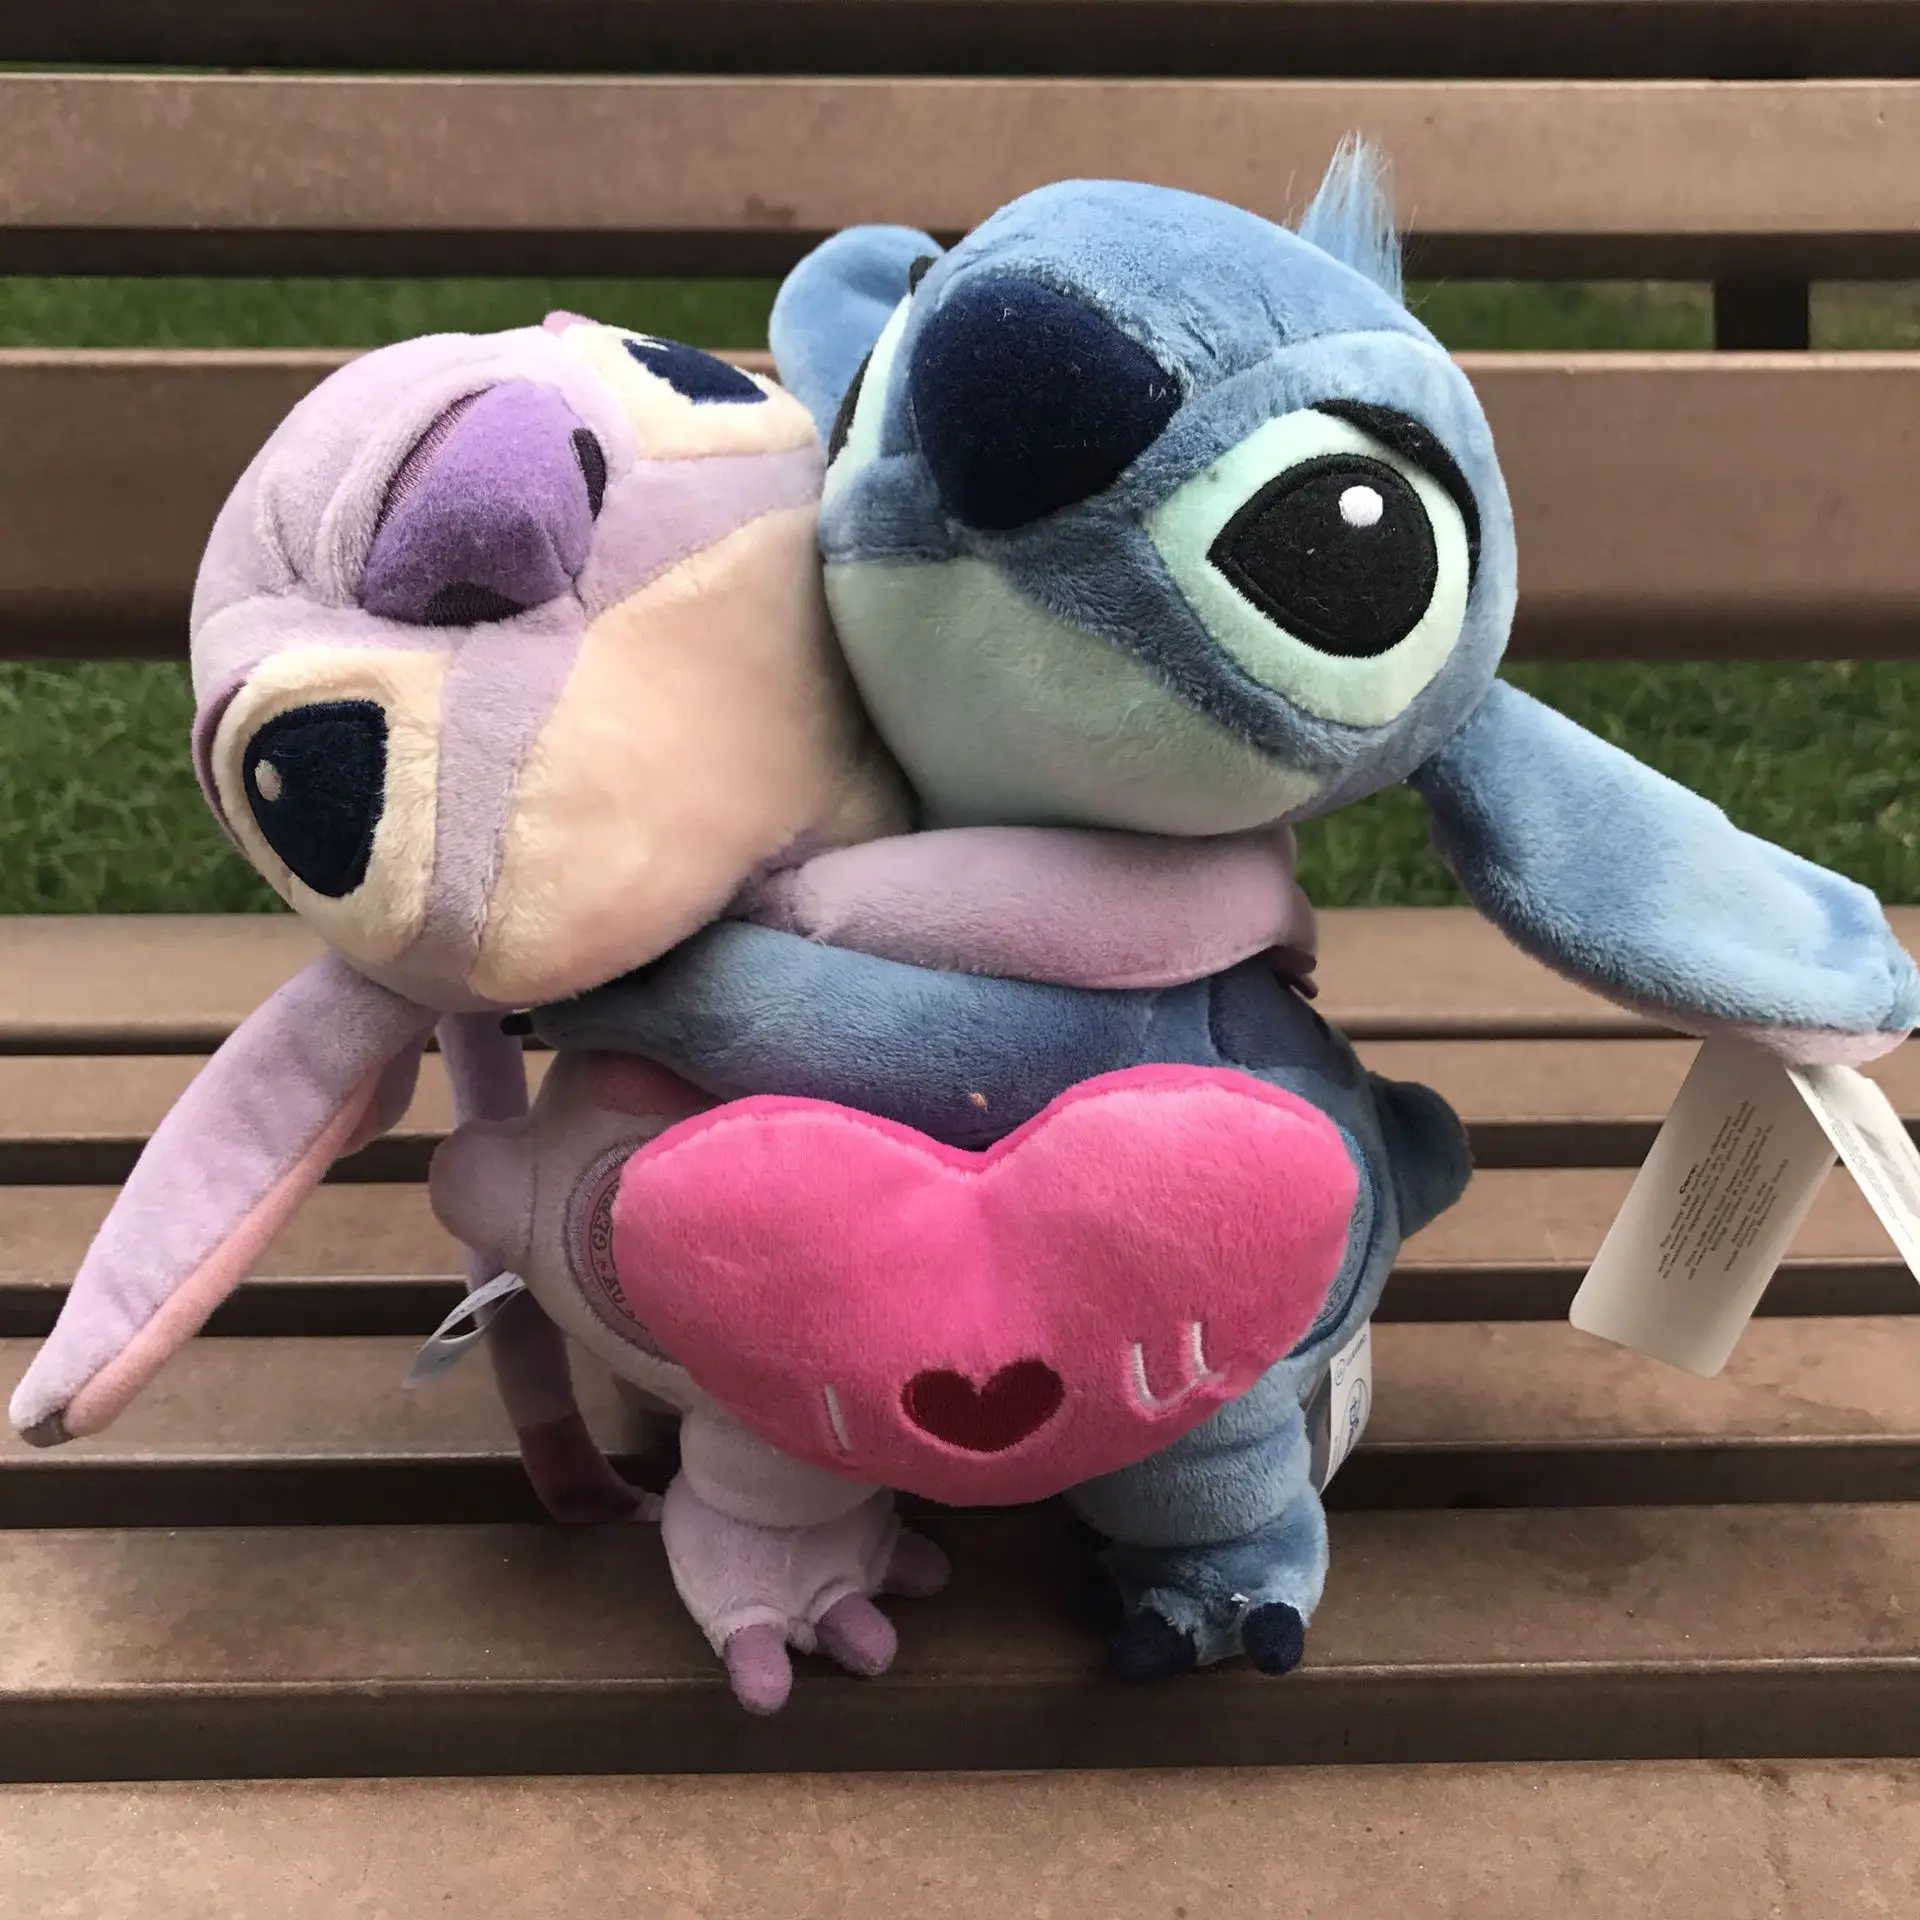 

20cm Disney Lilo Stitch Soft Stuffed Plush Doll Toys Delicate Kawaii Home Decoration Great Birthday Gifts for Kids or Friends